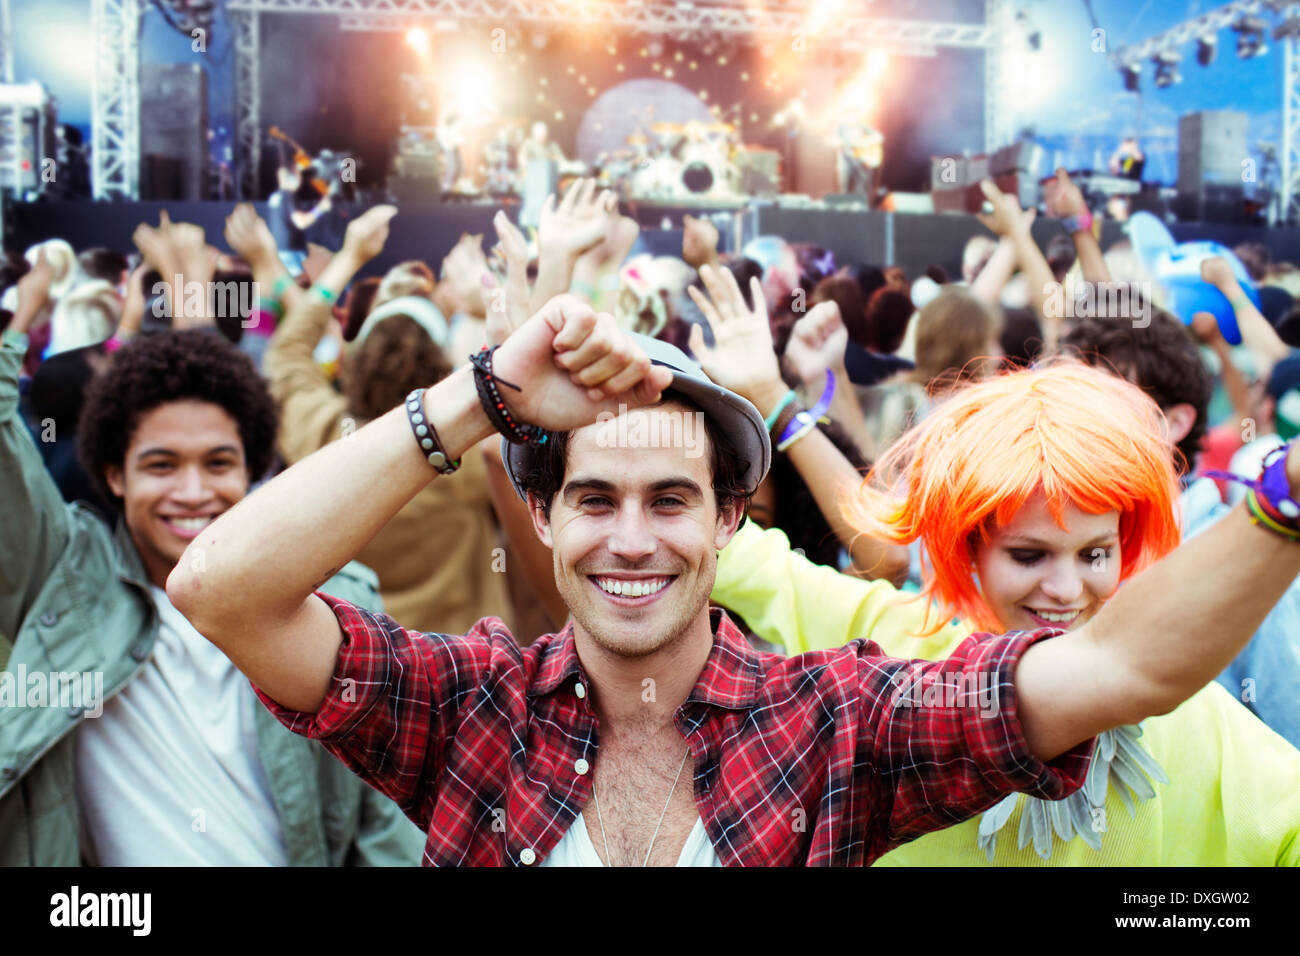 Portrait of fans dancing and cheering at music festival Stock Photo